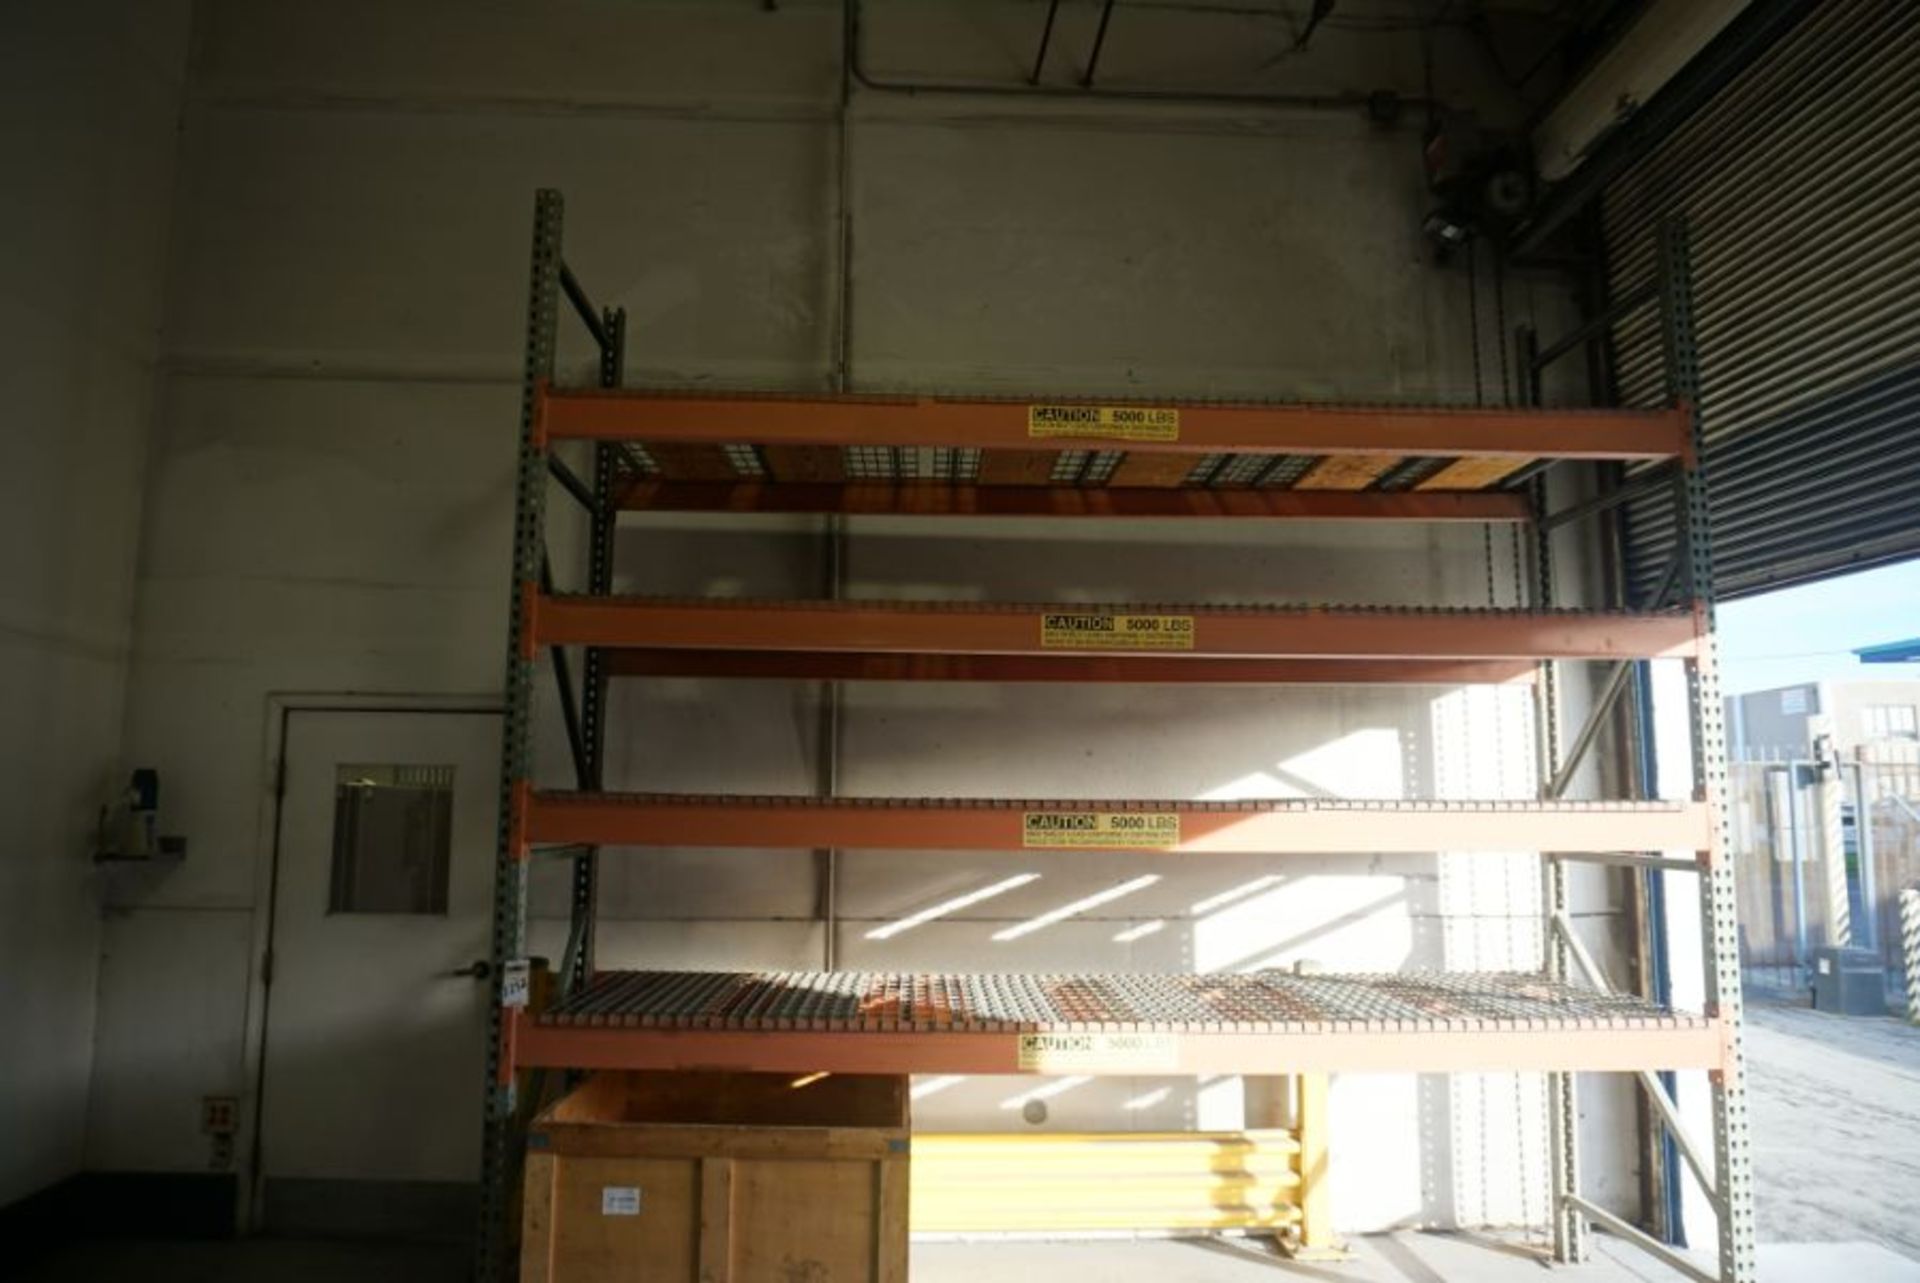 3 Sections of Pallet Racks - Image 2 of 3